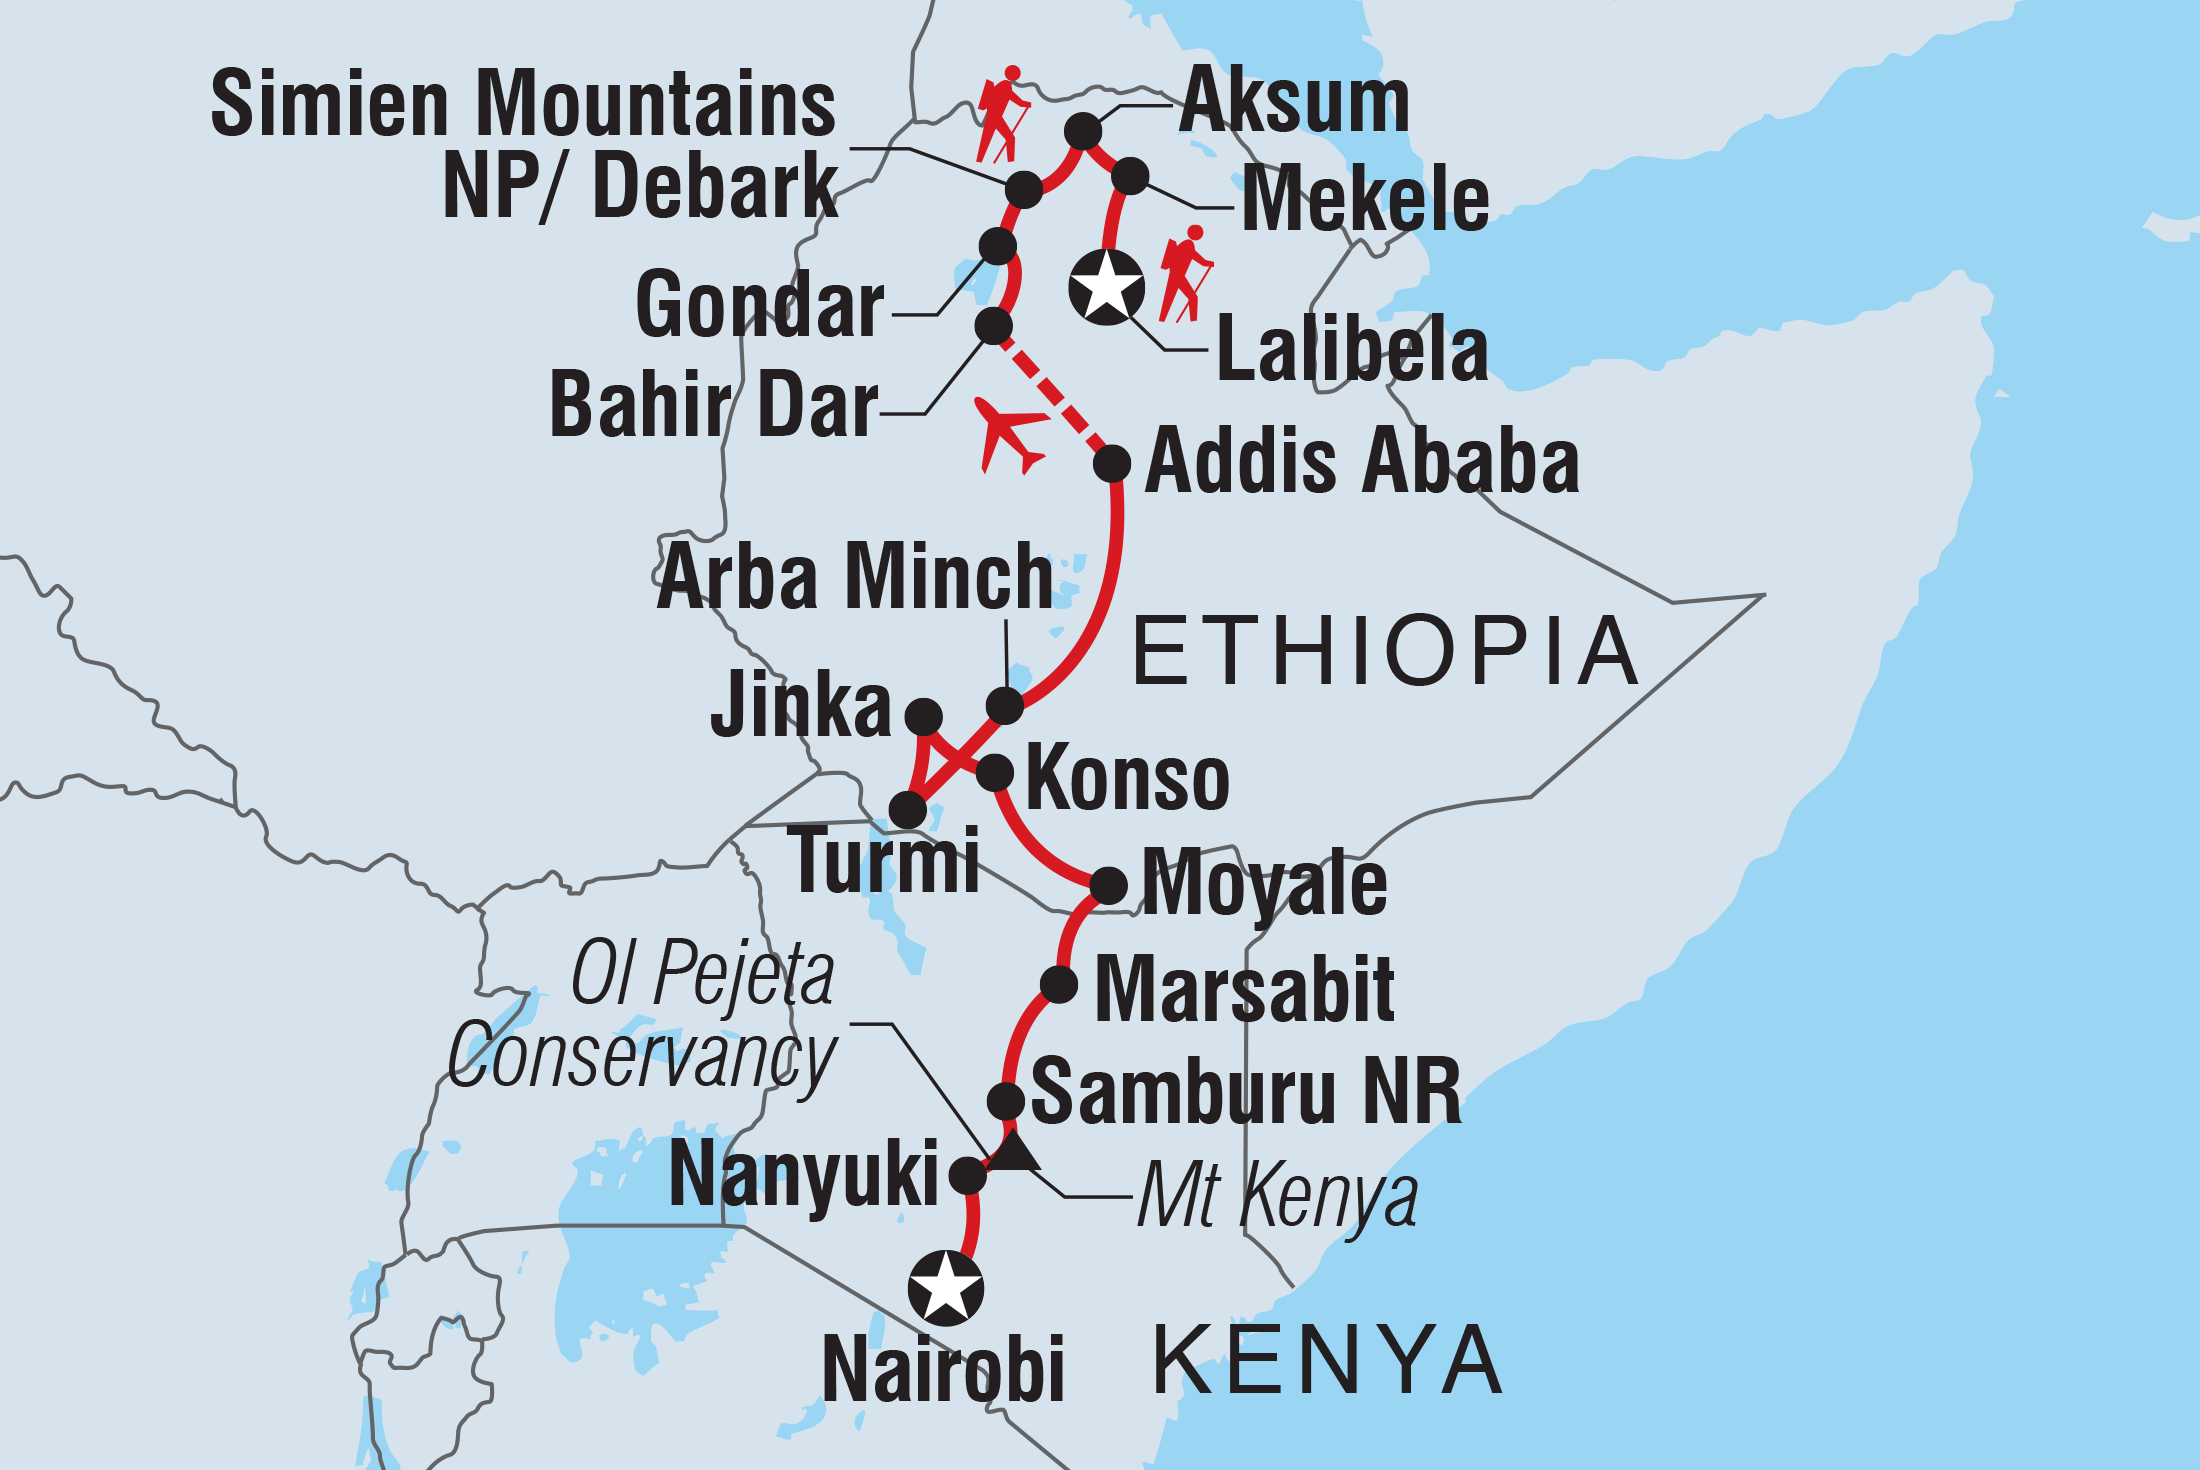 requirements to travel to kenya from ethiopia